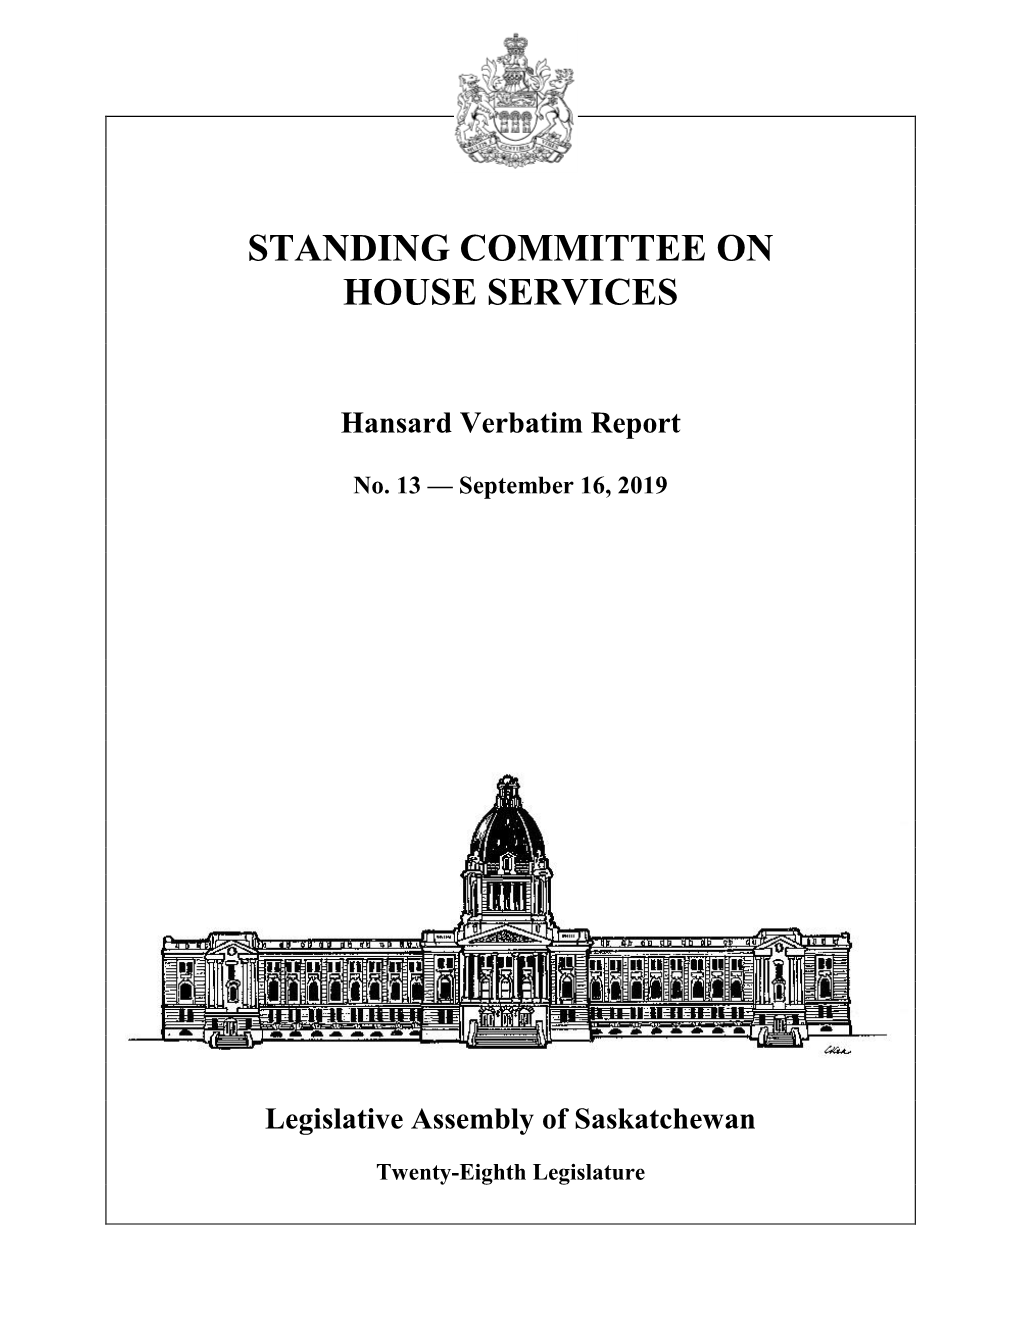 September 16, 2019 House Services Committee